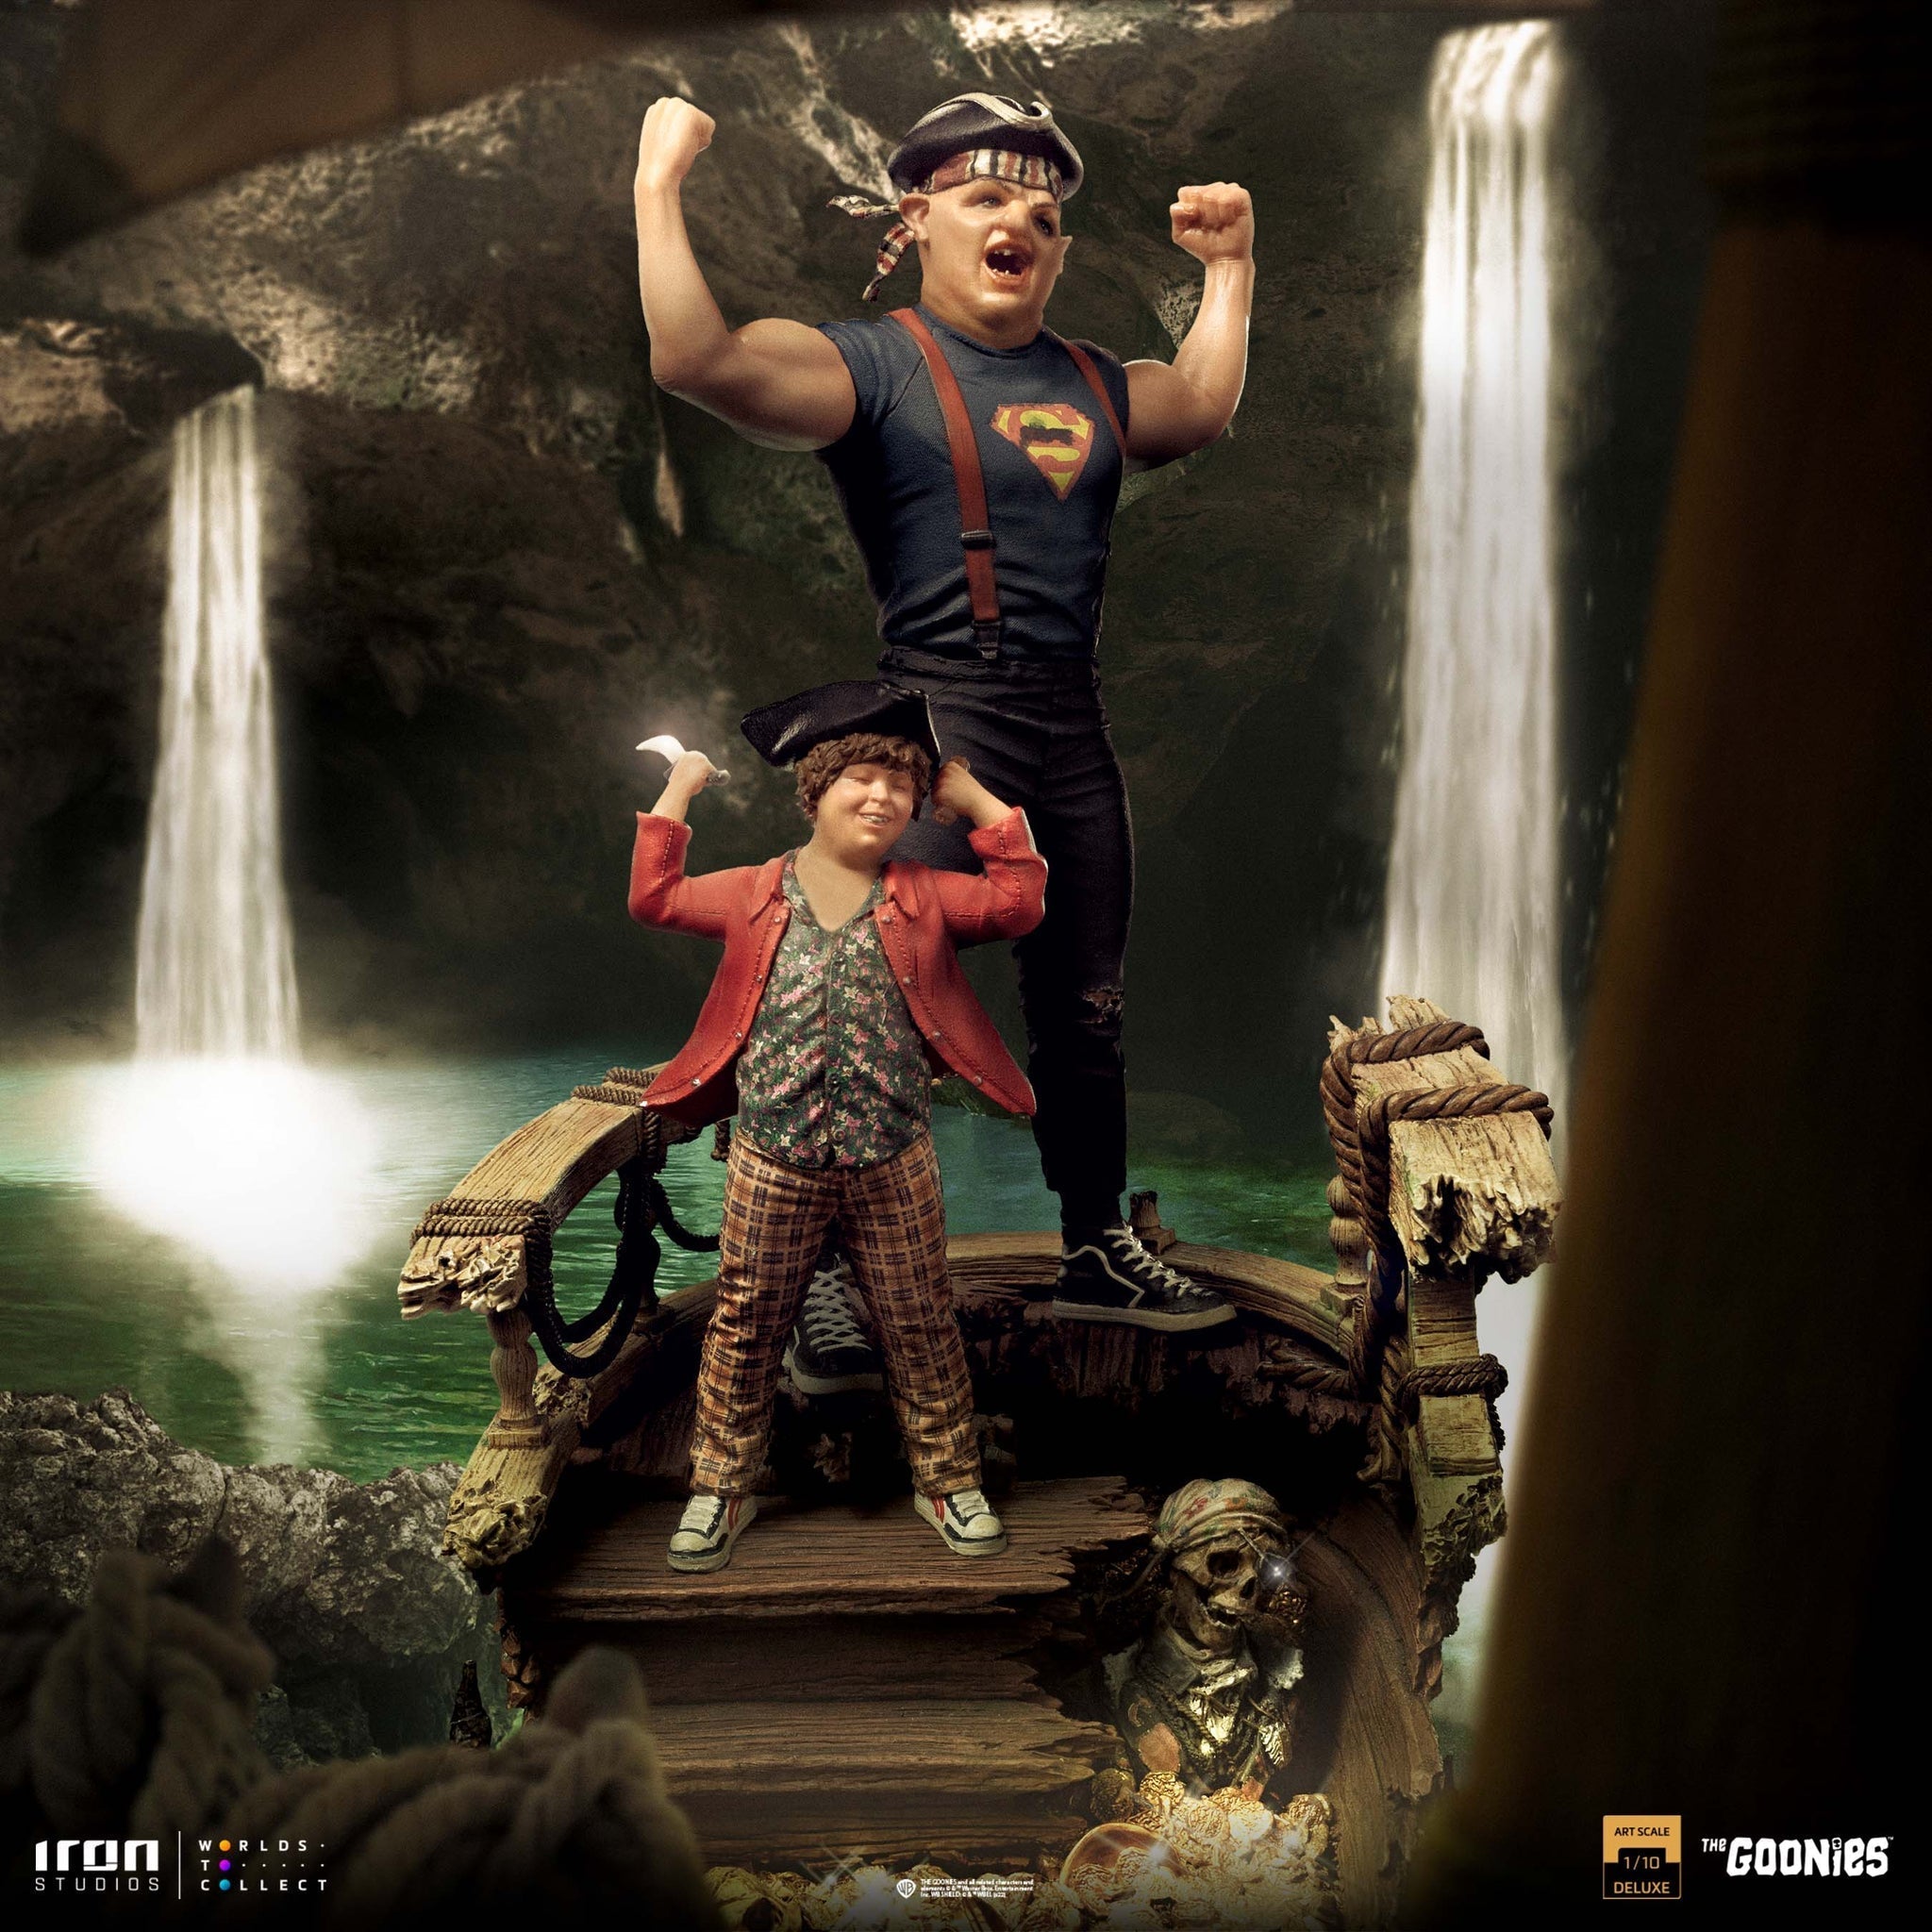 Sloth And Chunk: Deluxe: The Goonies: 1/10 Art Scale Iron Studios